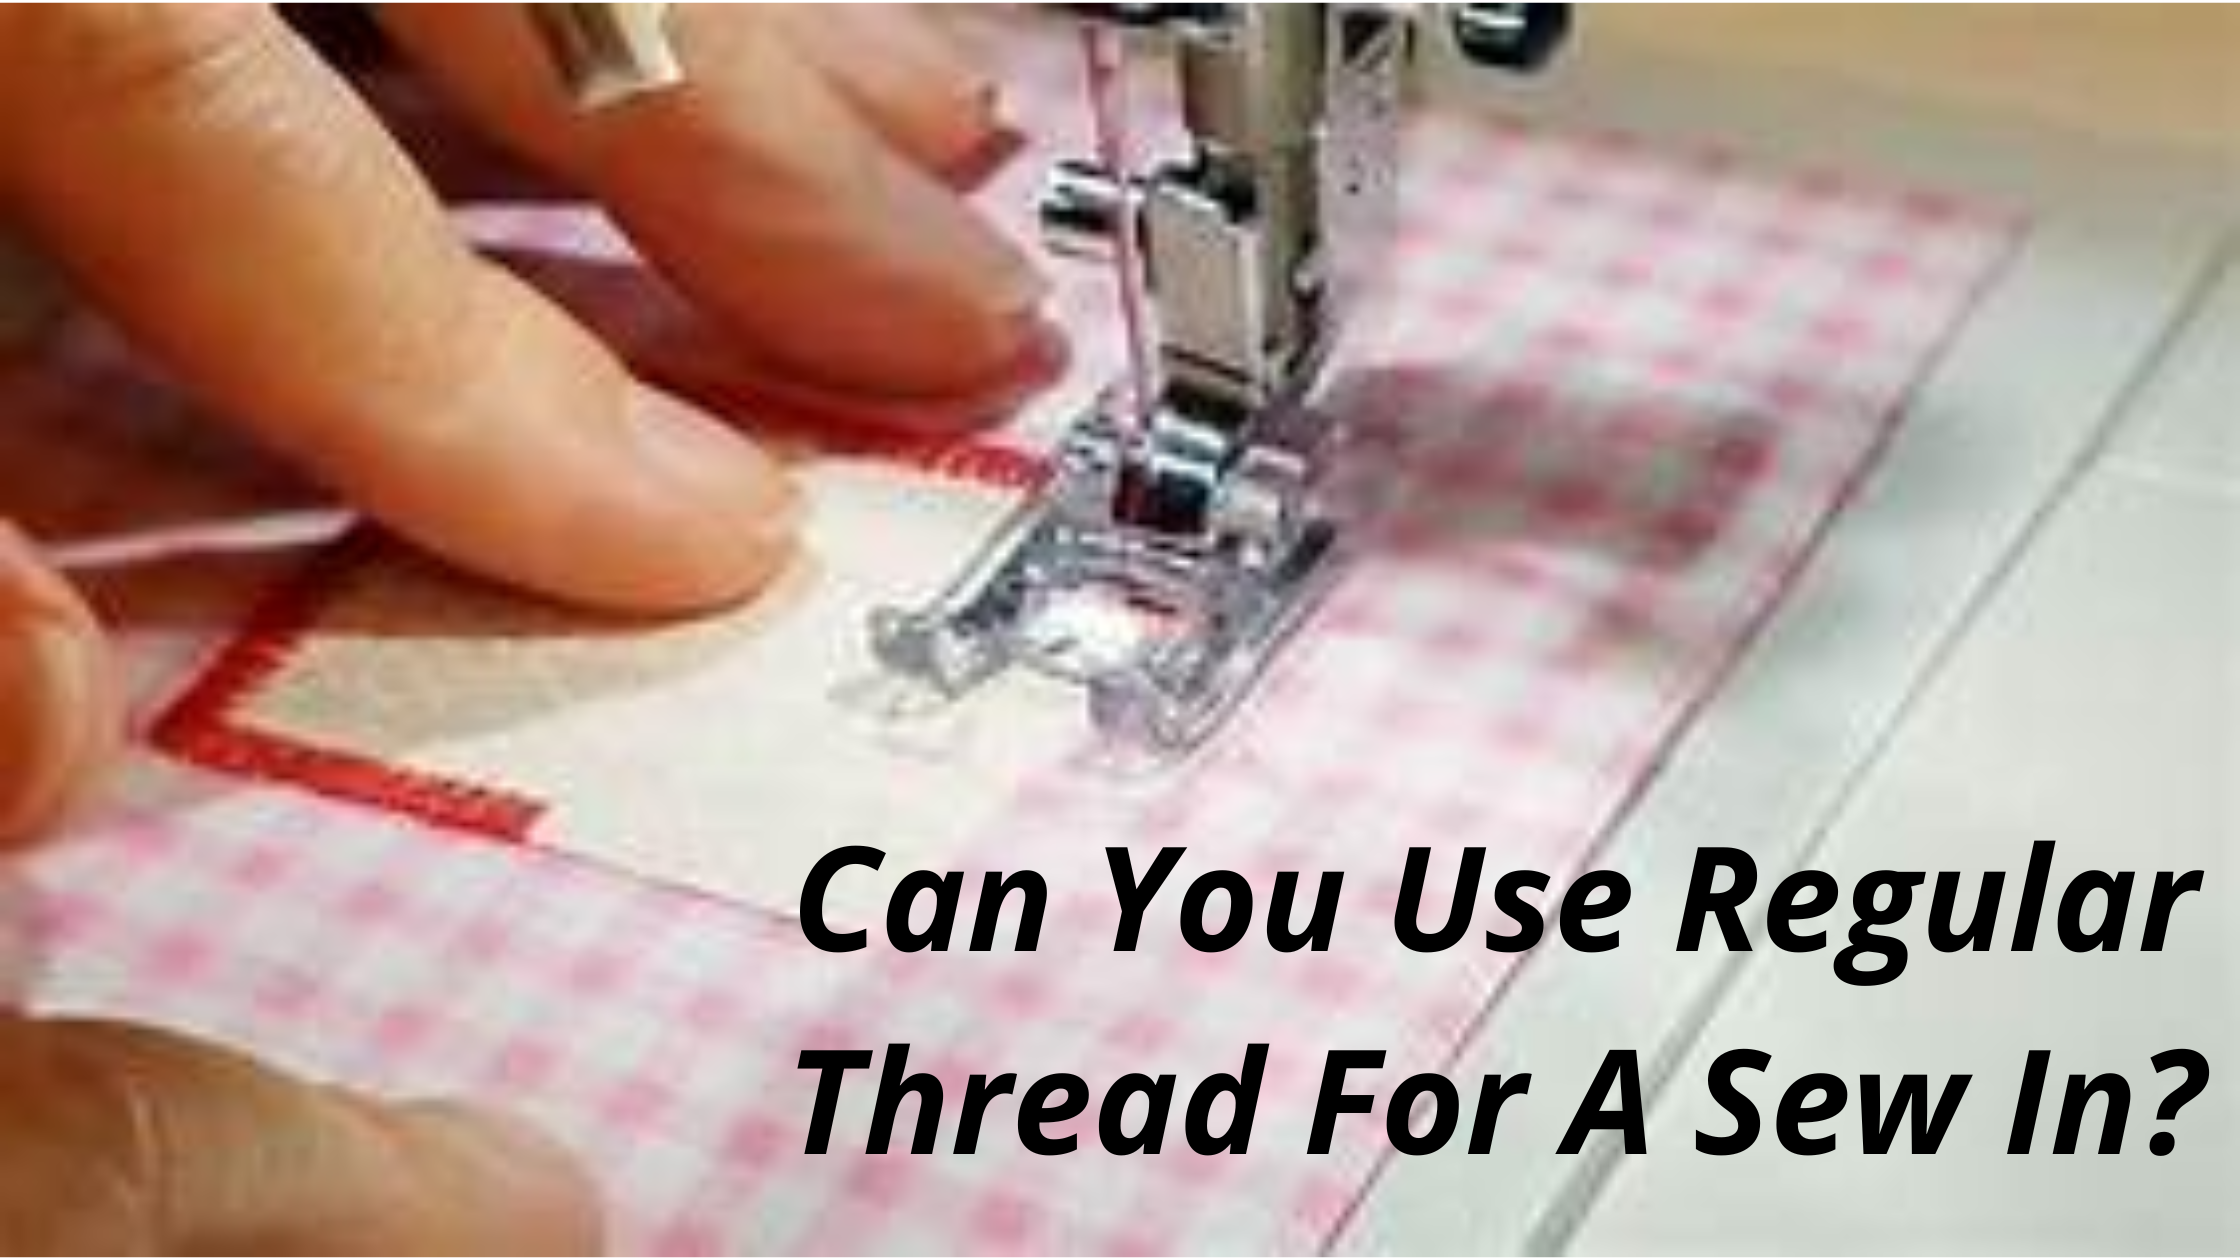 Can You Use Regular Thread For A Sew In?